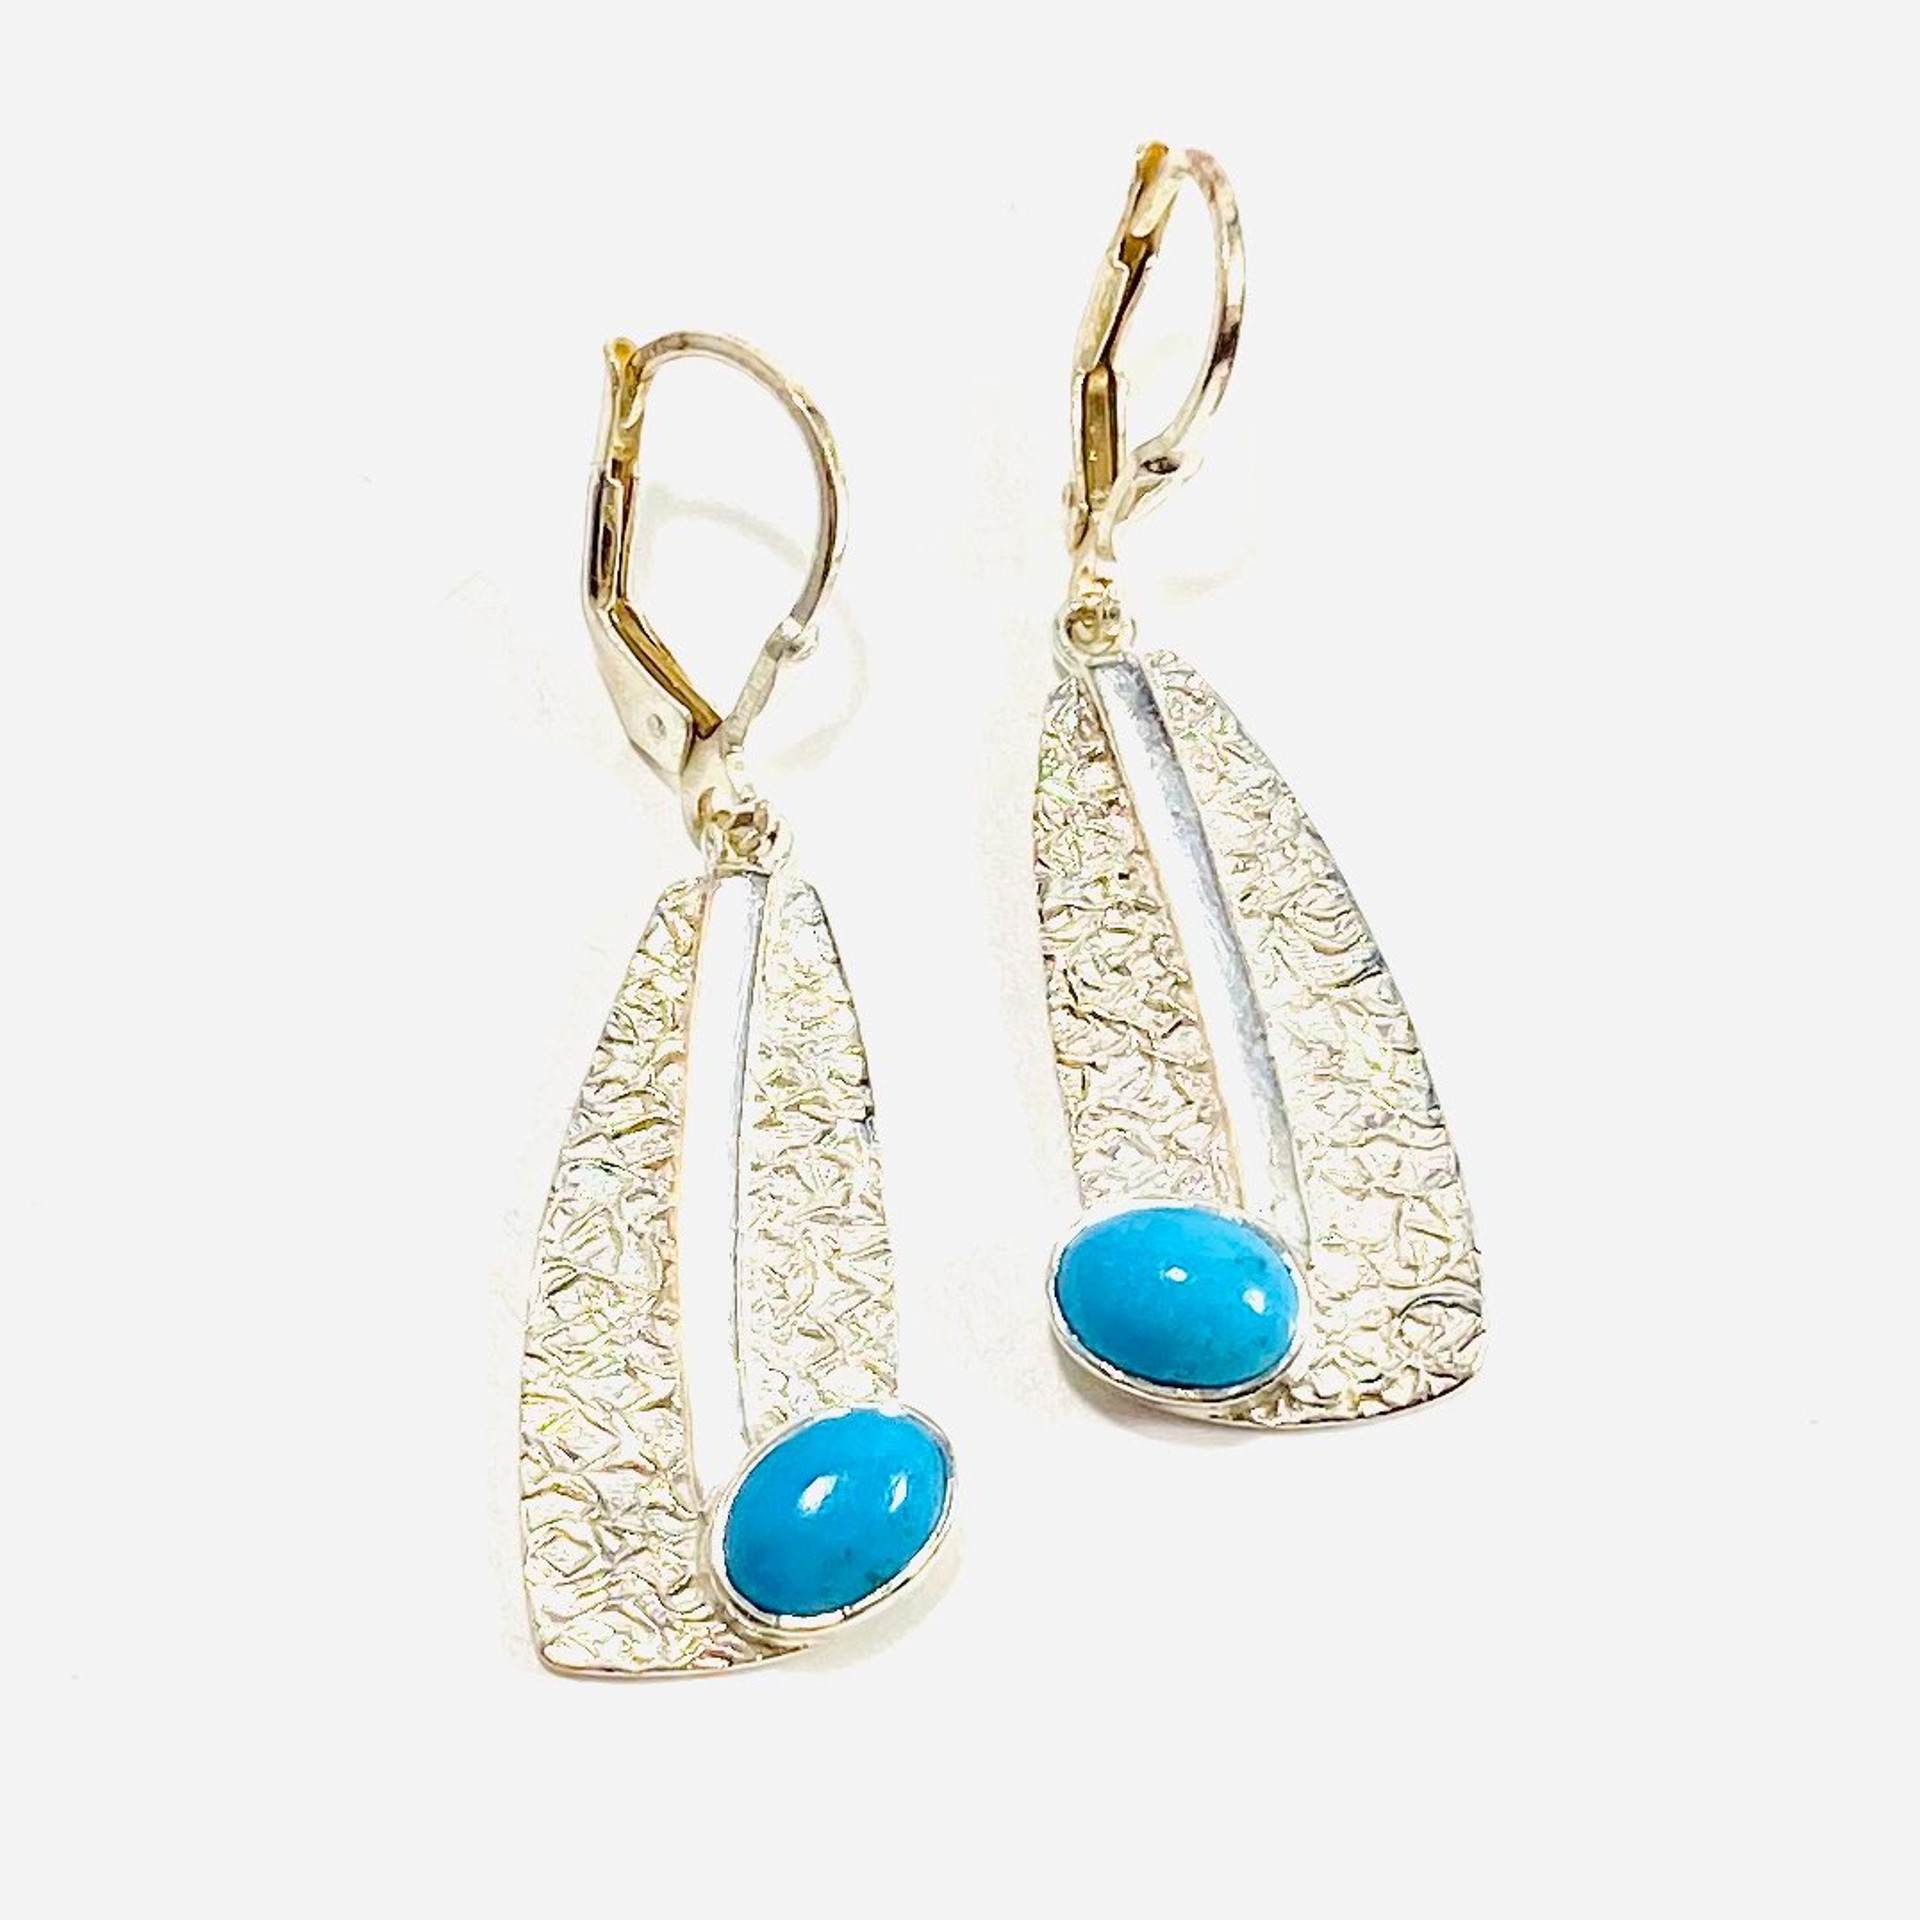 MON SE 3130 Sleeping Beauty Turquoise or Lapis Lazuli Earrings, french wire clasp by Monica Mehta